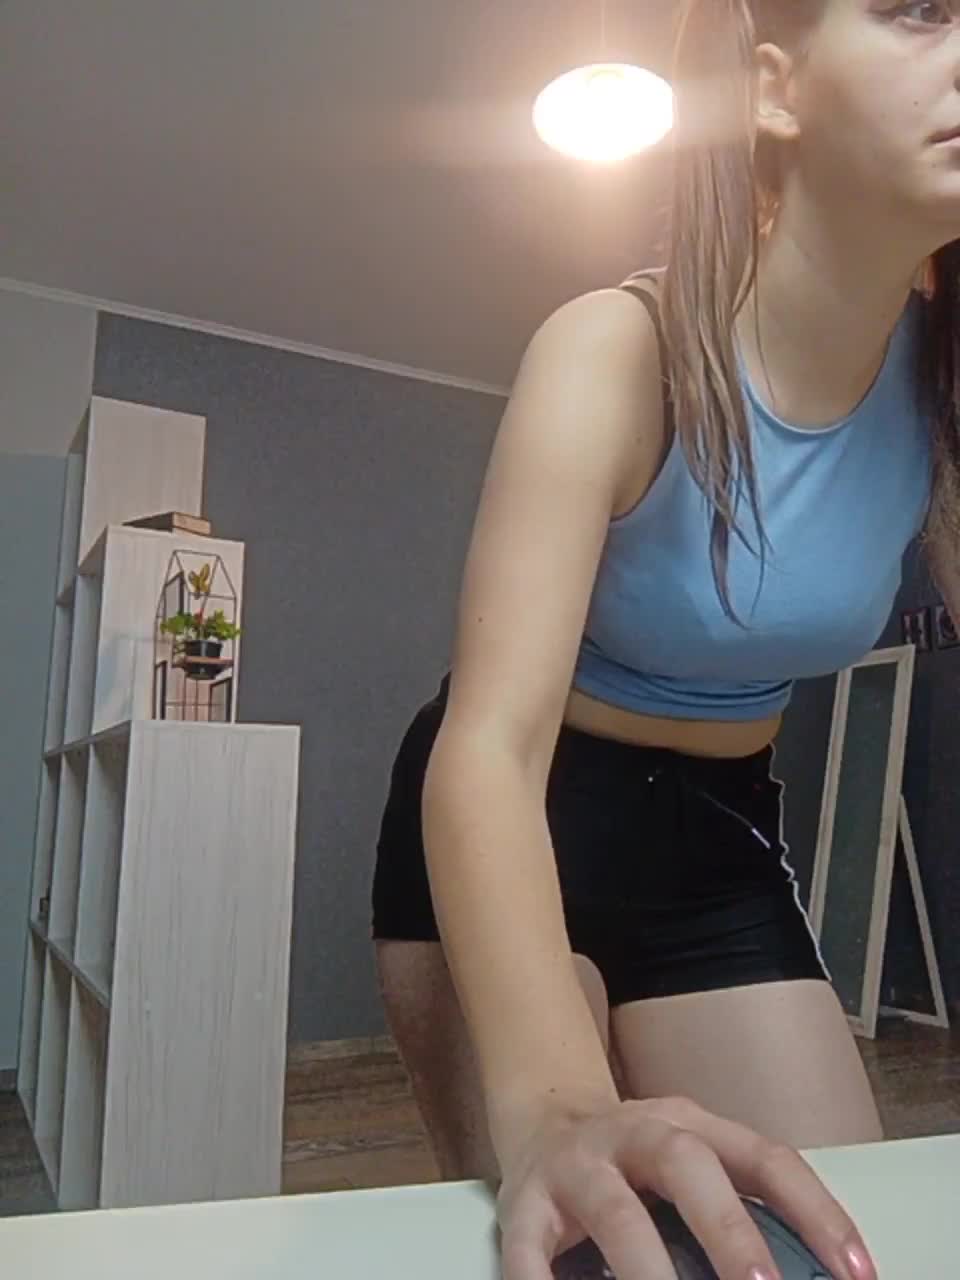 View or download file alwaysbeast on 2023-03-15 from bongacams